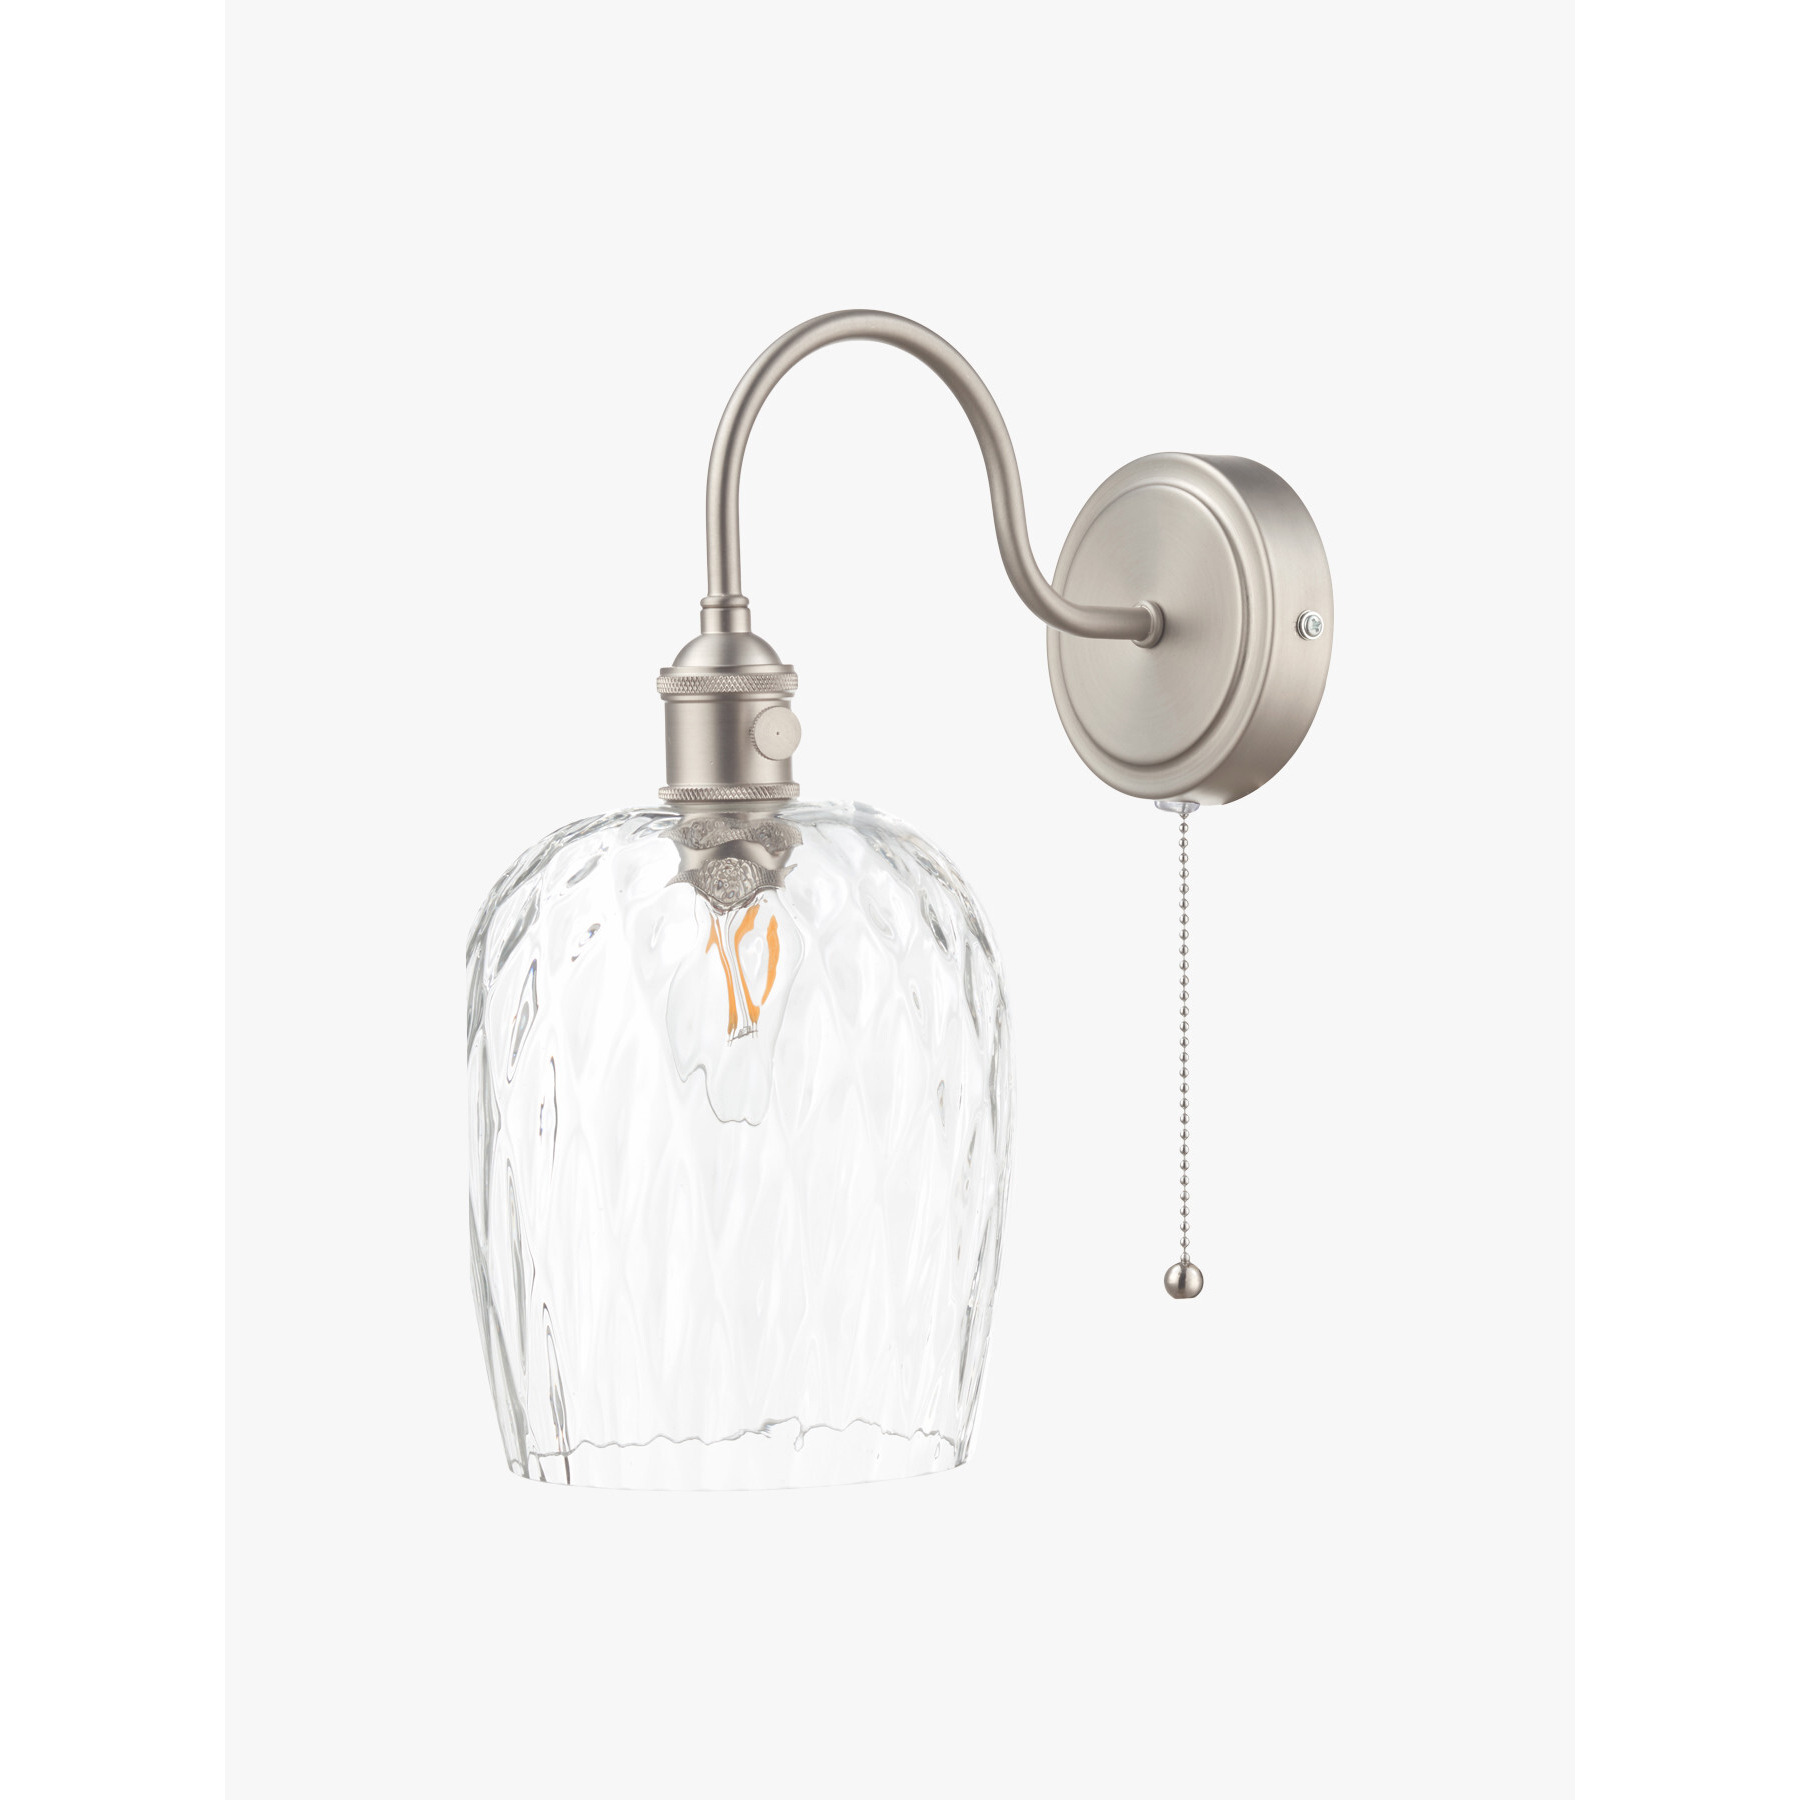 Dar Lighting Hadano Wall Light -  Antique Chrome with Clear Dimpled Glass Shade Silver - image 1